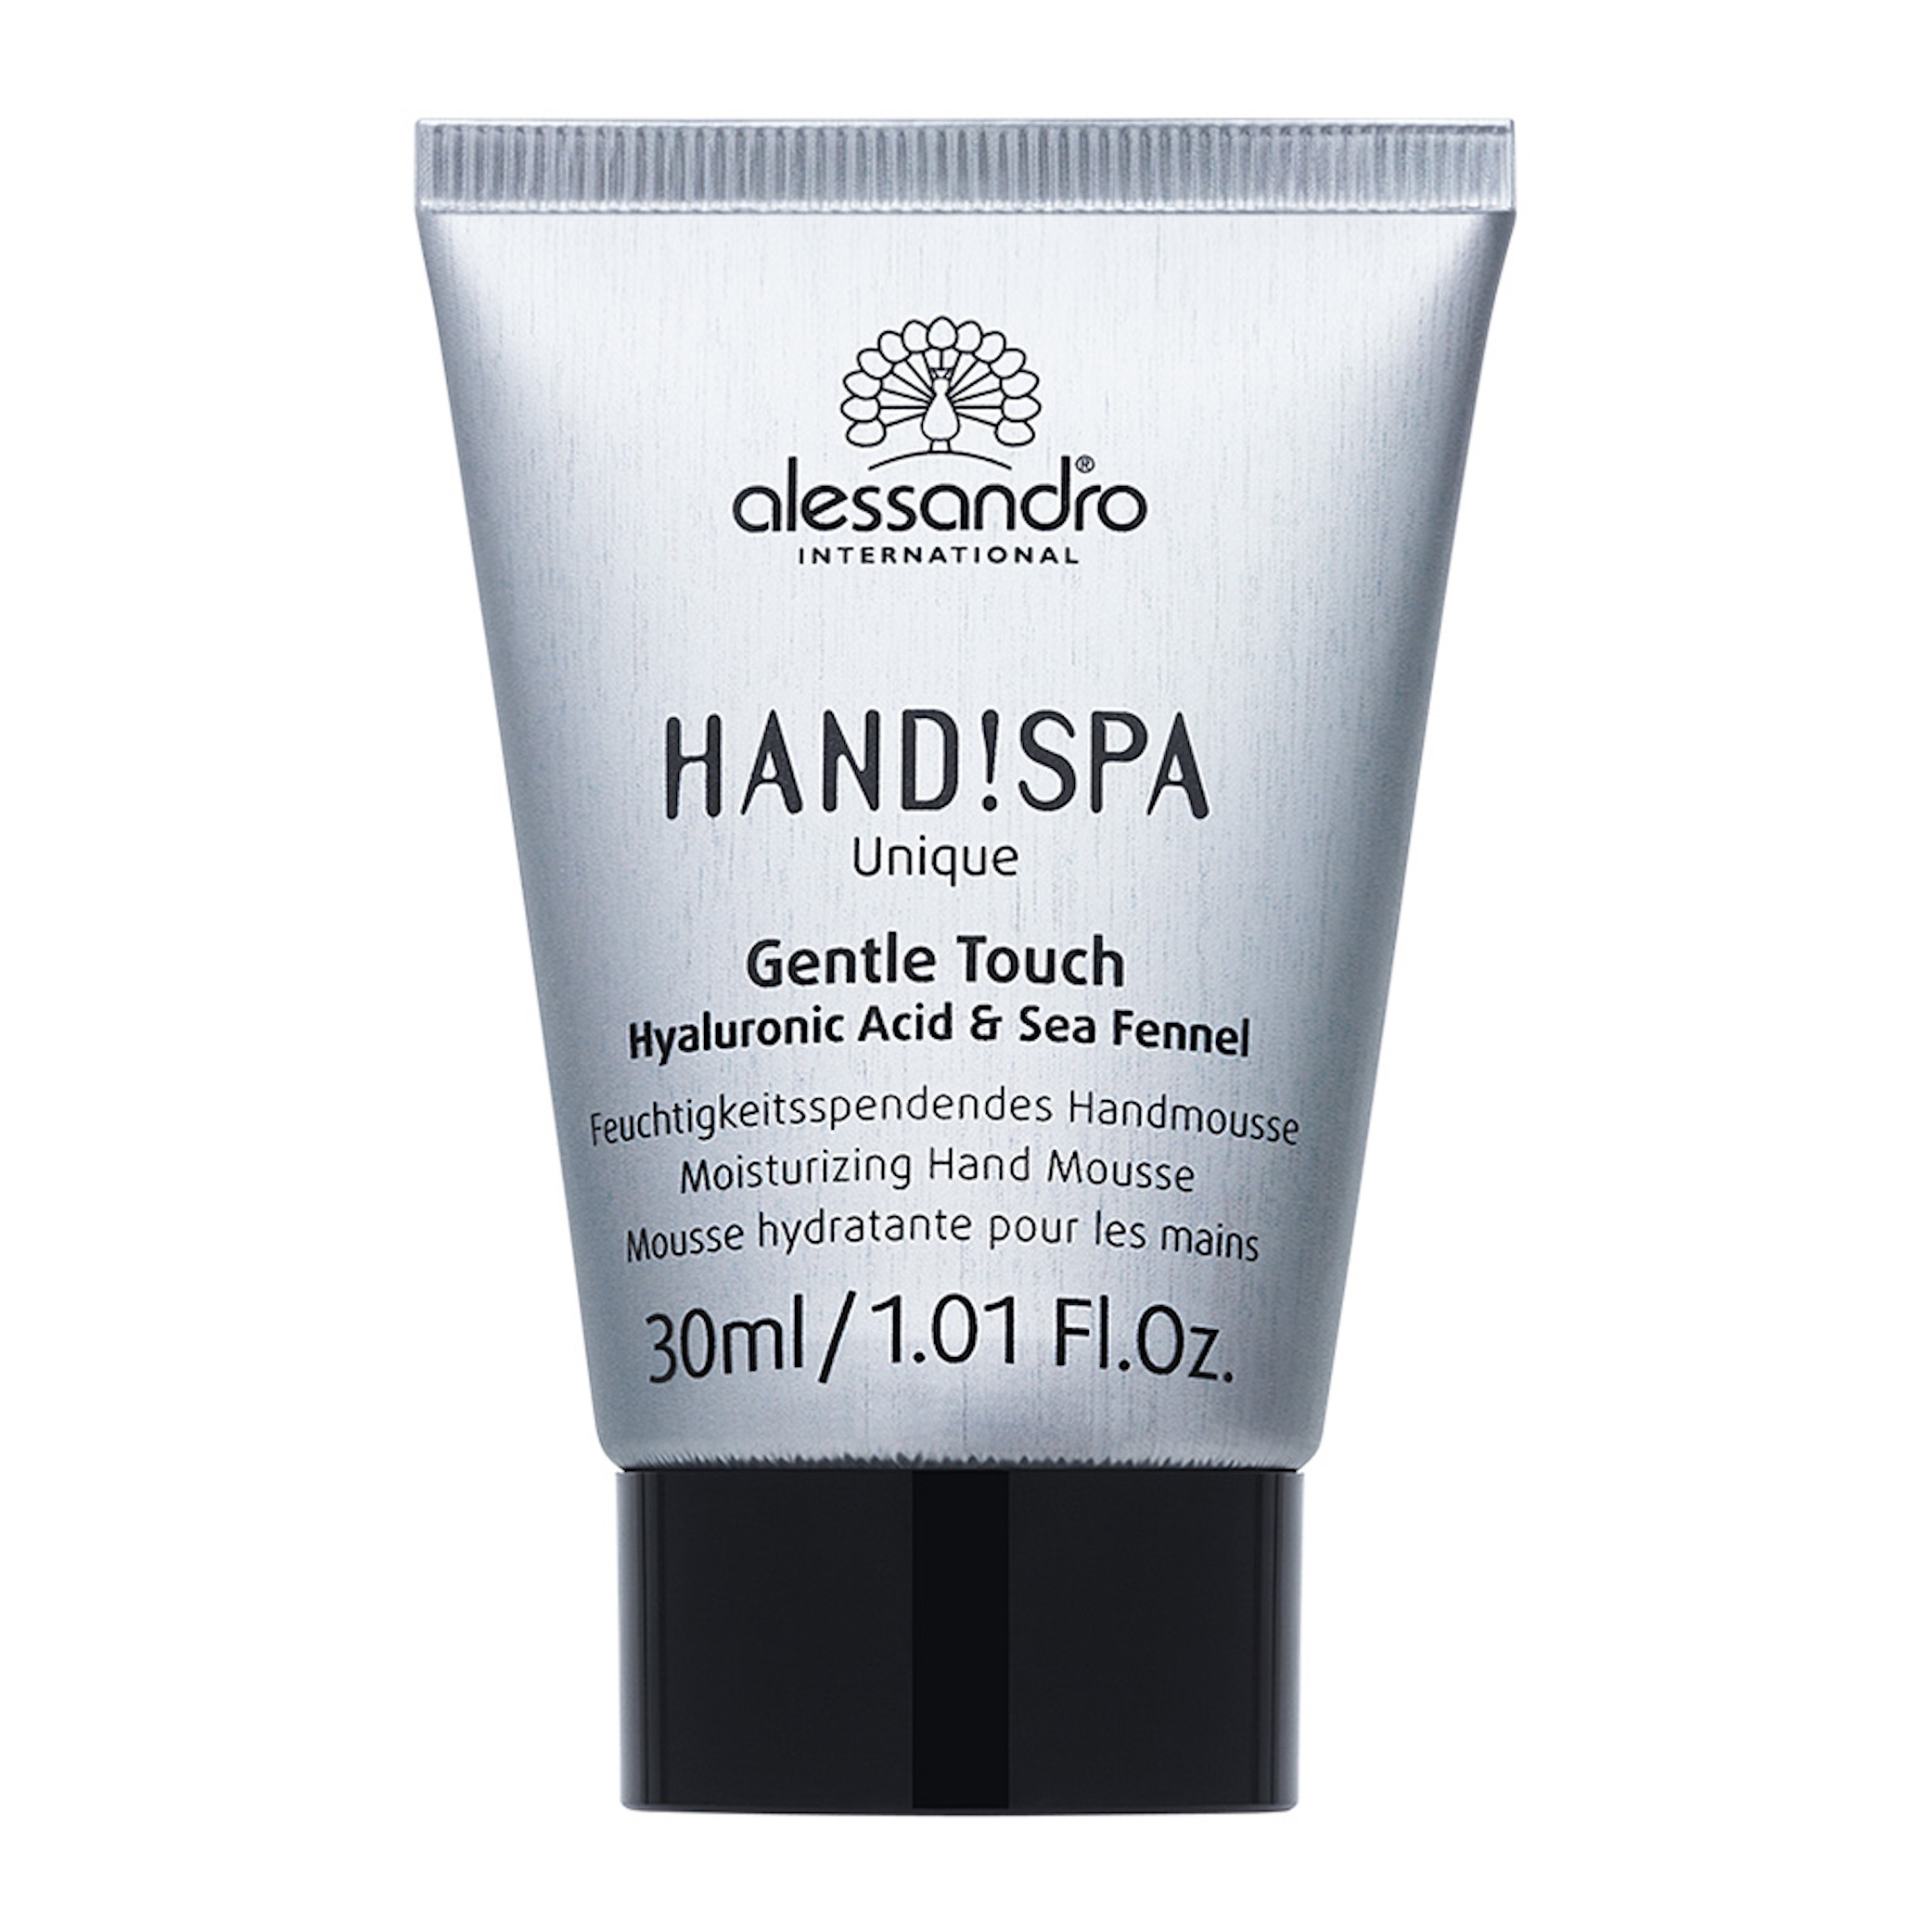 Wholesale | Touch 30 | Alessandro Tradeling Gentle ml Spa Unique Hand